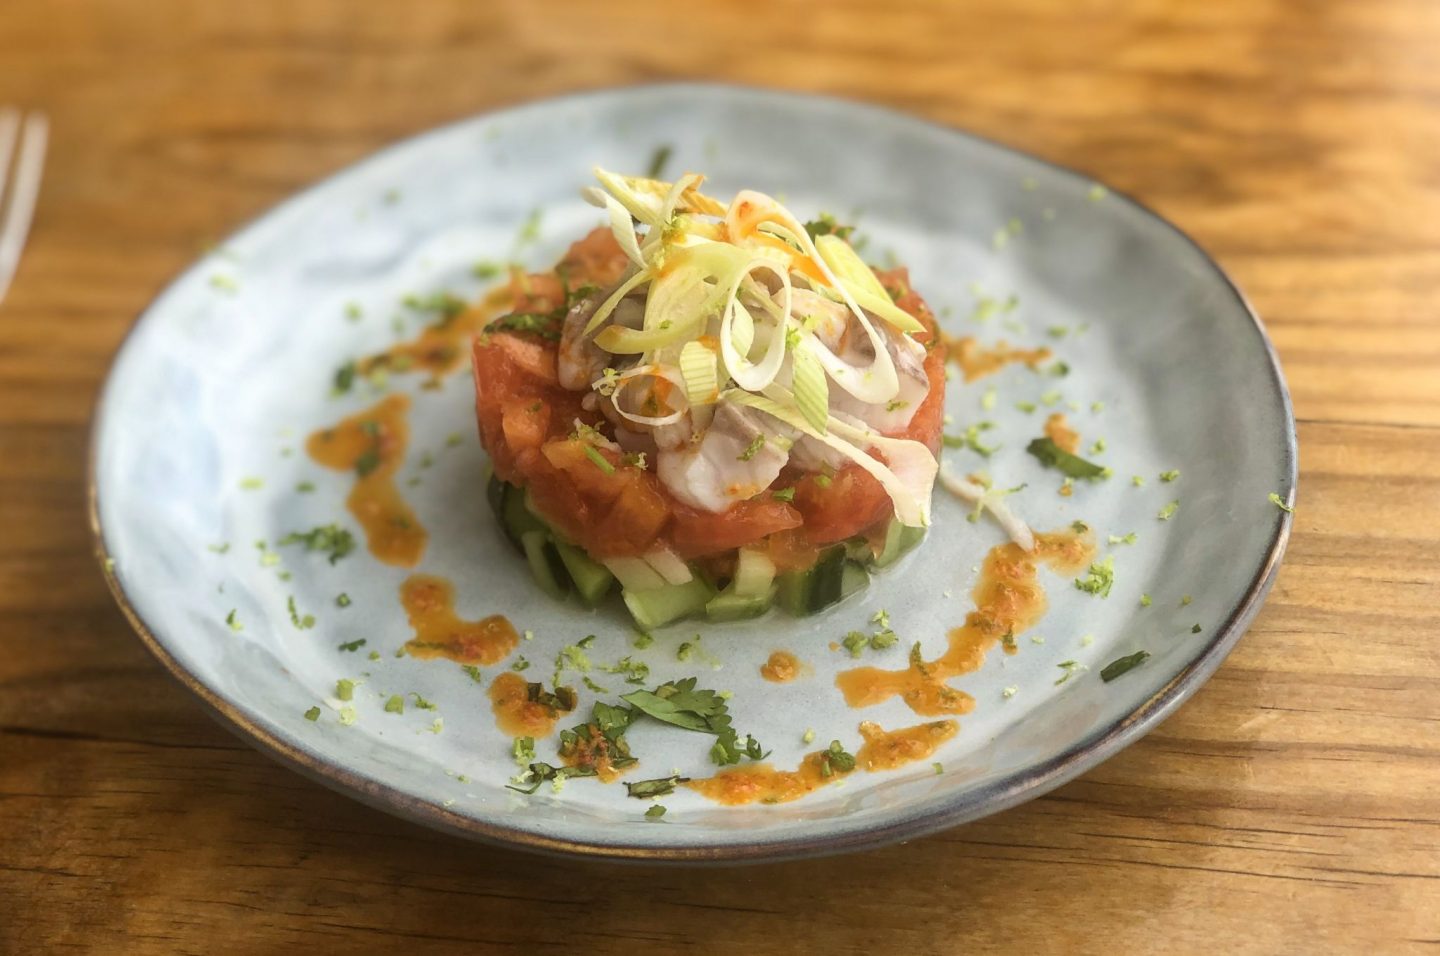 Ceviche fish beautifully presented on a papaya and cucumber salad in Gran Canaria